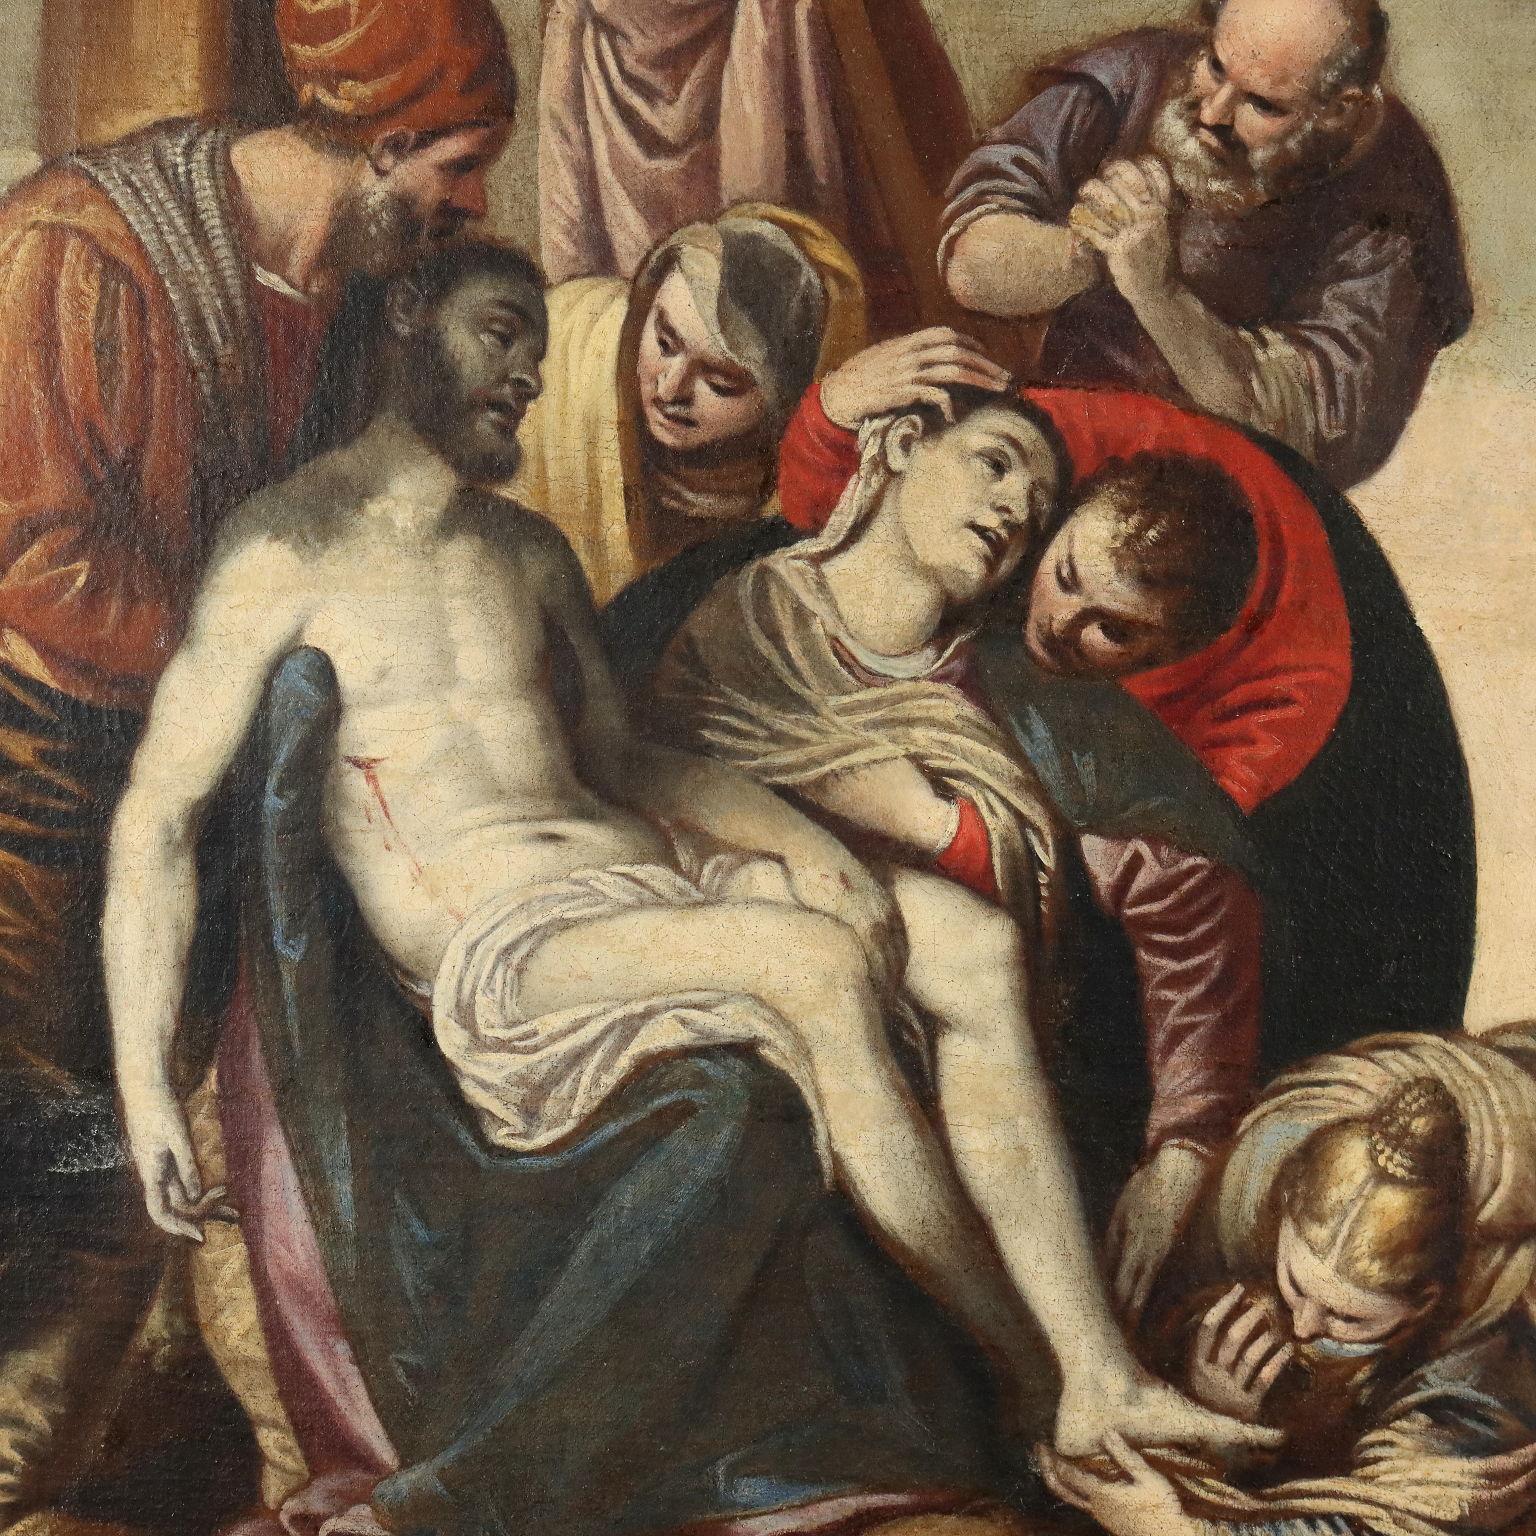 Oil on Canvas. Neapolitan school of the seventeenth-eighteenth century.
It is a traditional scene of Christ's deposition from the Cross, with his inert, pale body lowered into the arms of his mother Mary, who in turn is embraced and supported in her